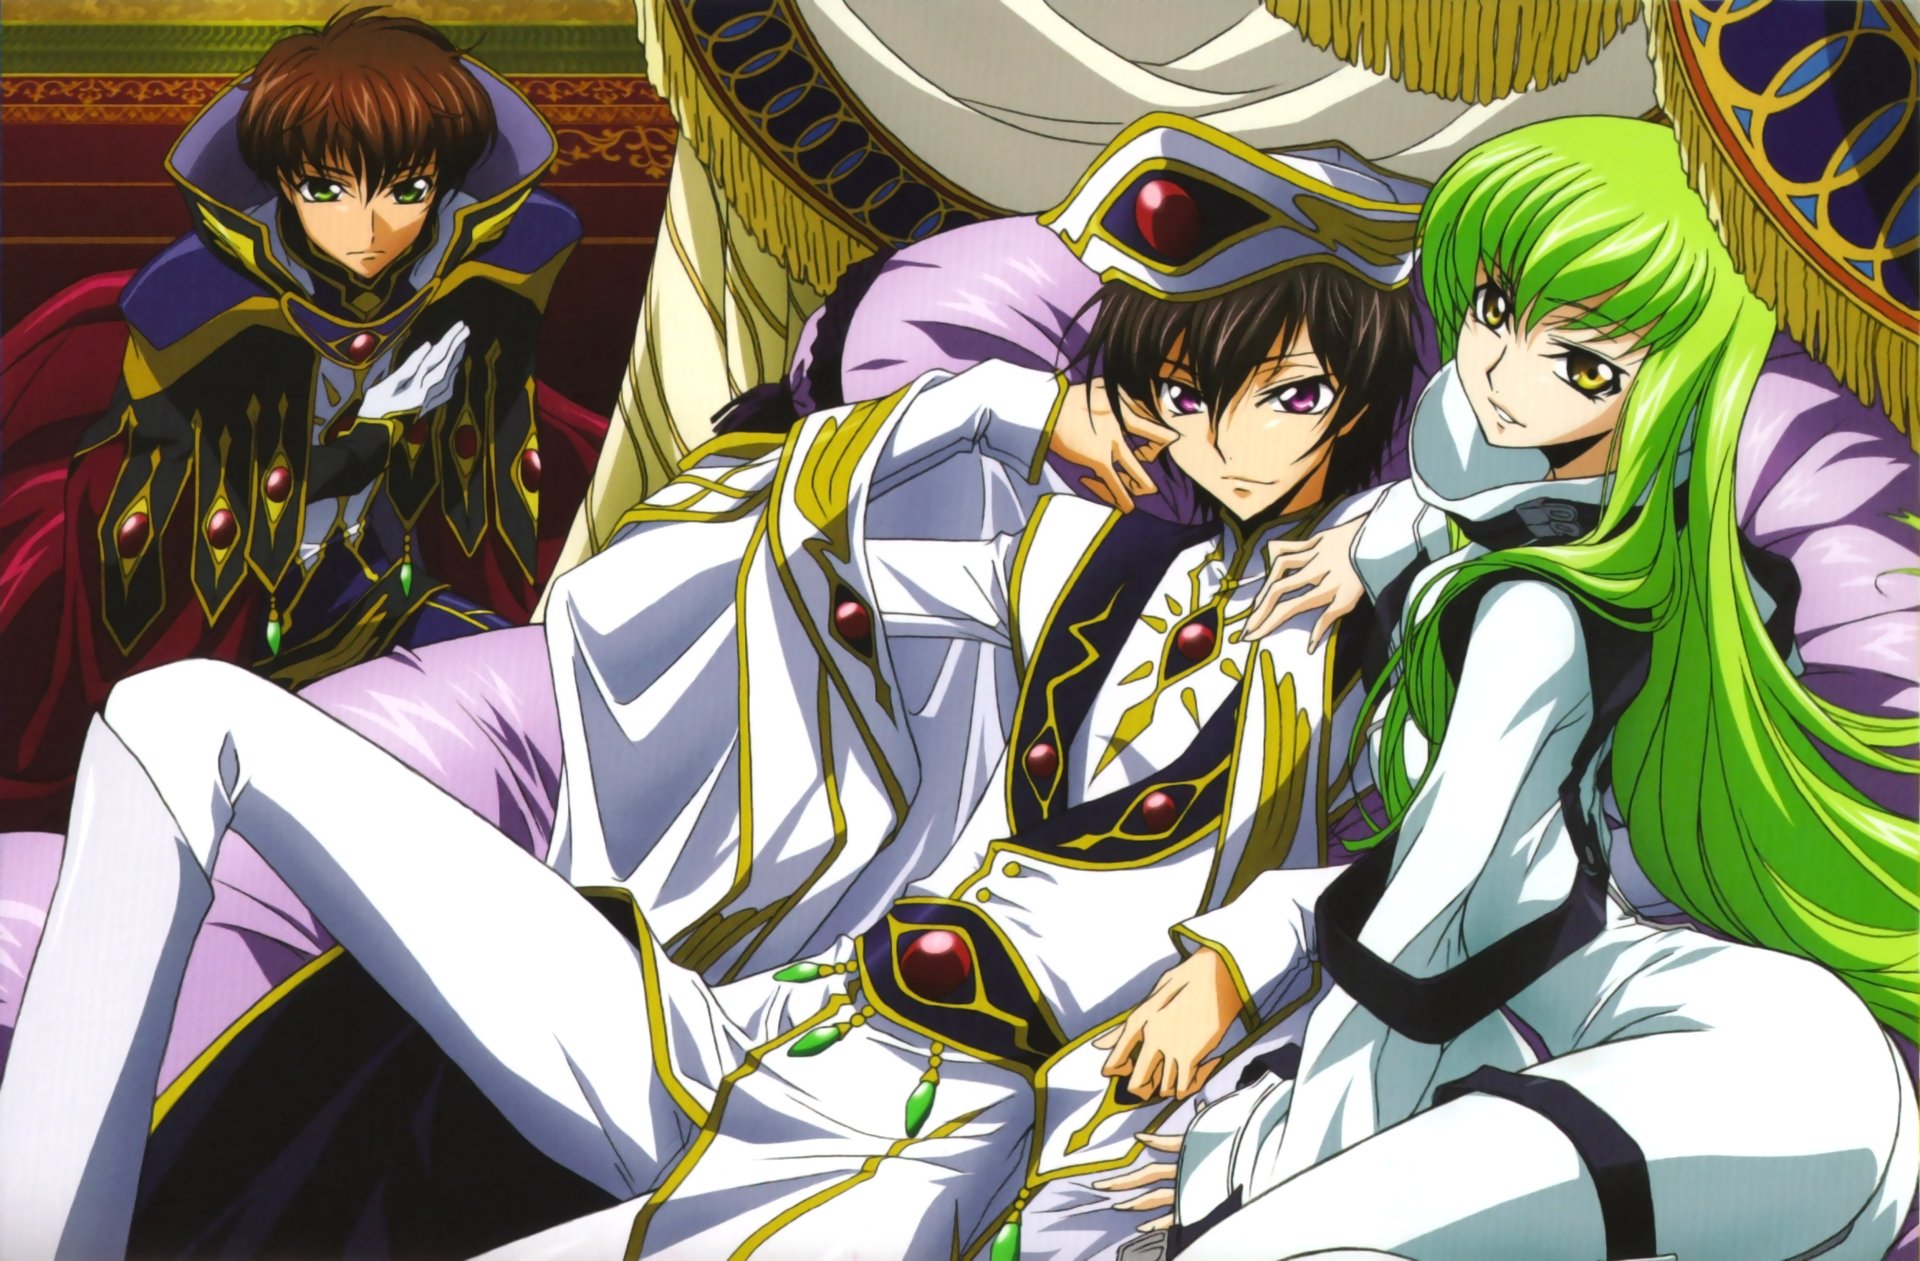 280 4k Ultra Hd Code Geass Wallpapers Background Images